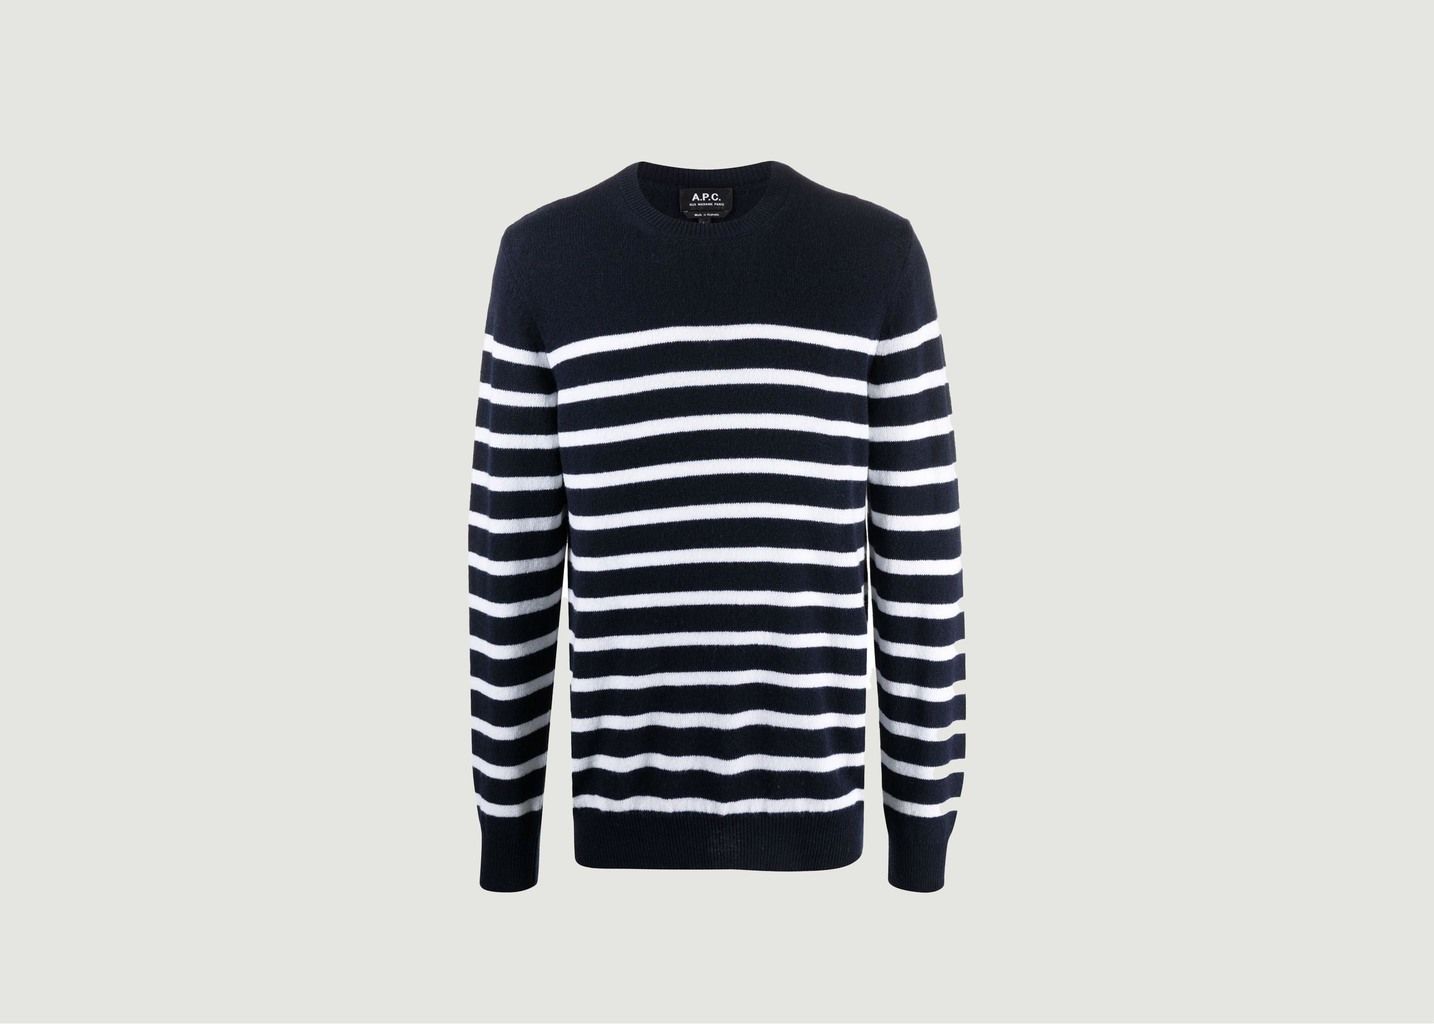 Travis wool and cotton sweater - A.P.C.